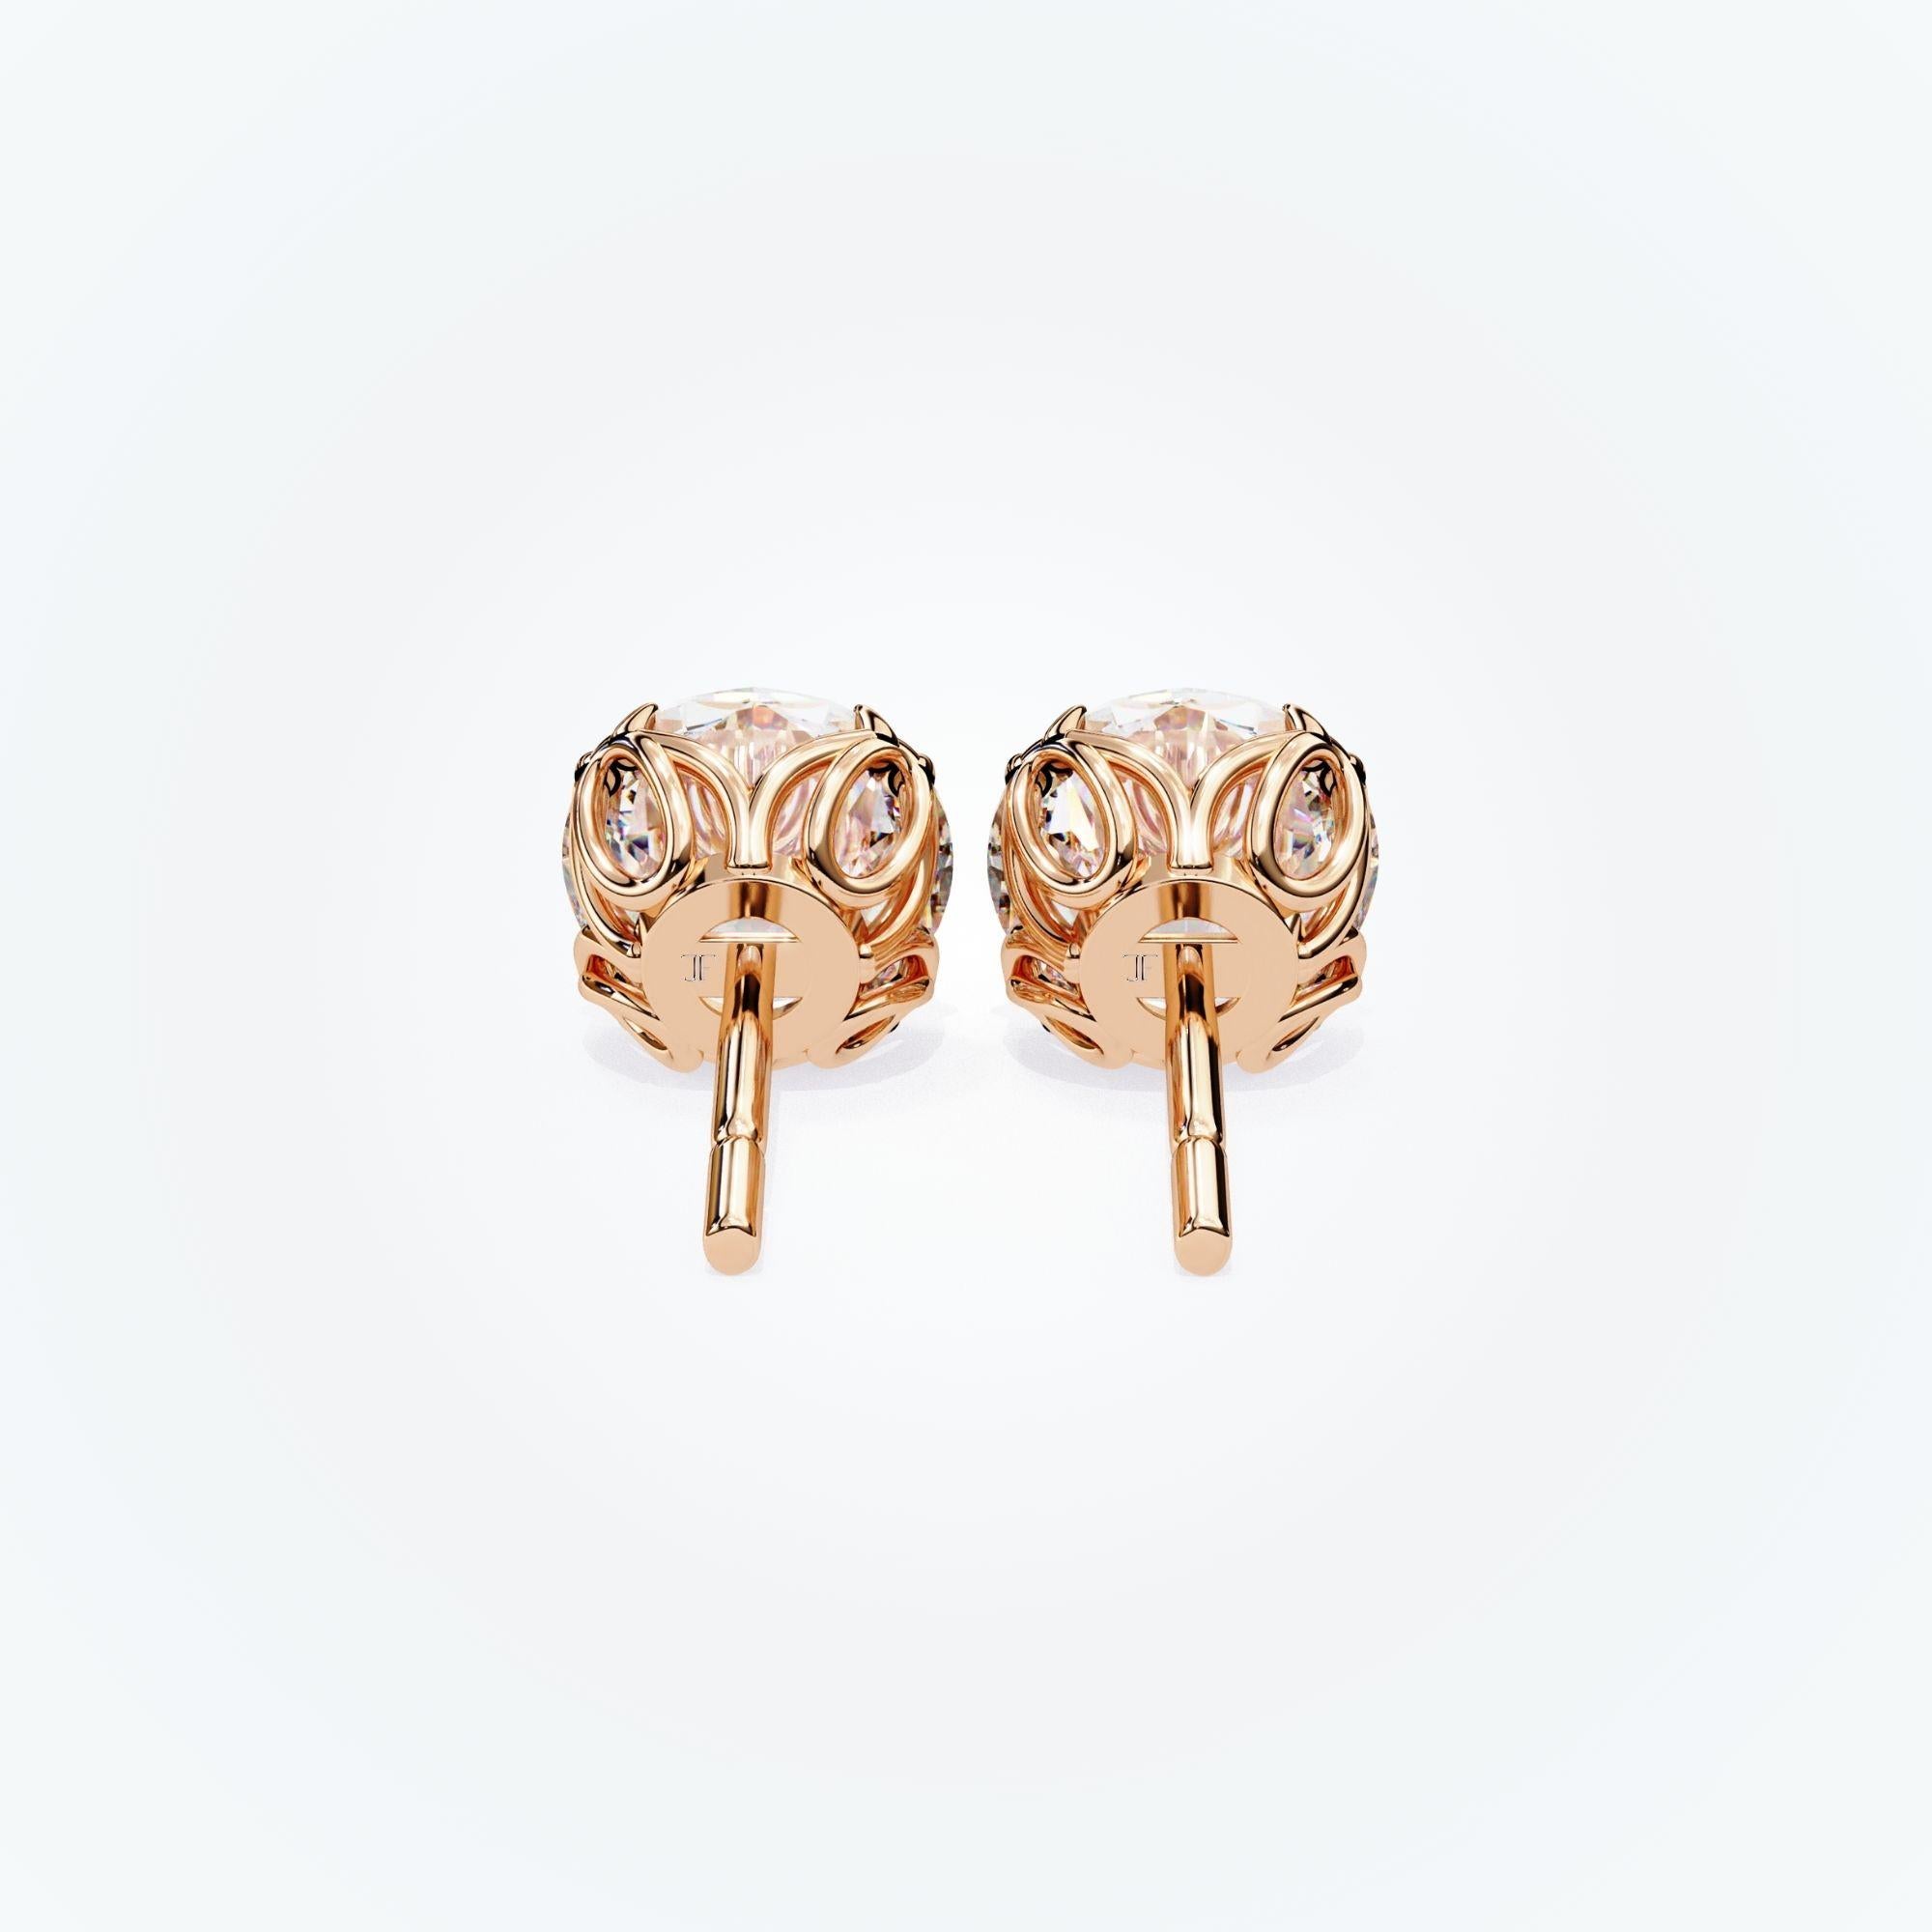 Natural Diamond Studs, Floral, 8 Prongs, 1/2 carat total weight, 14K Solid Gold For Sale 11